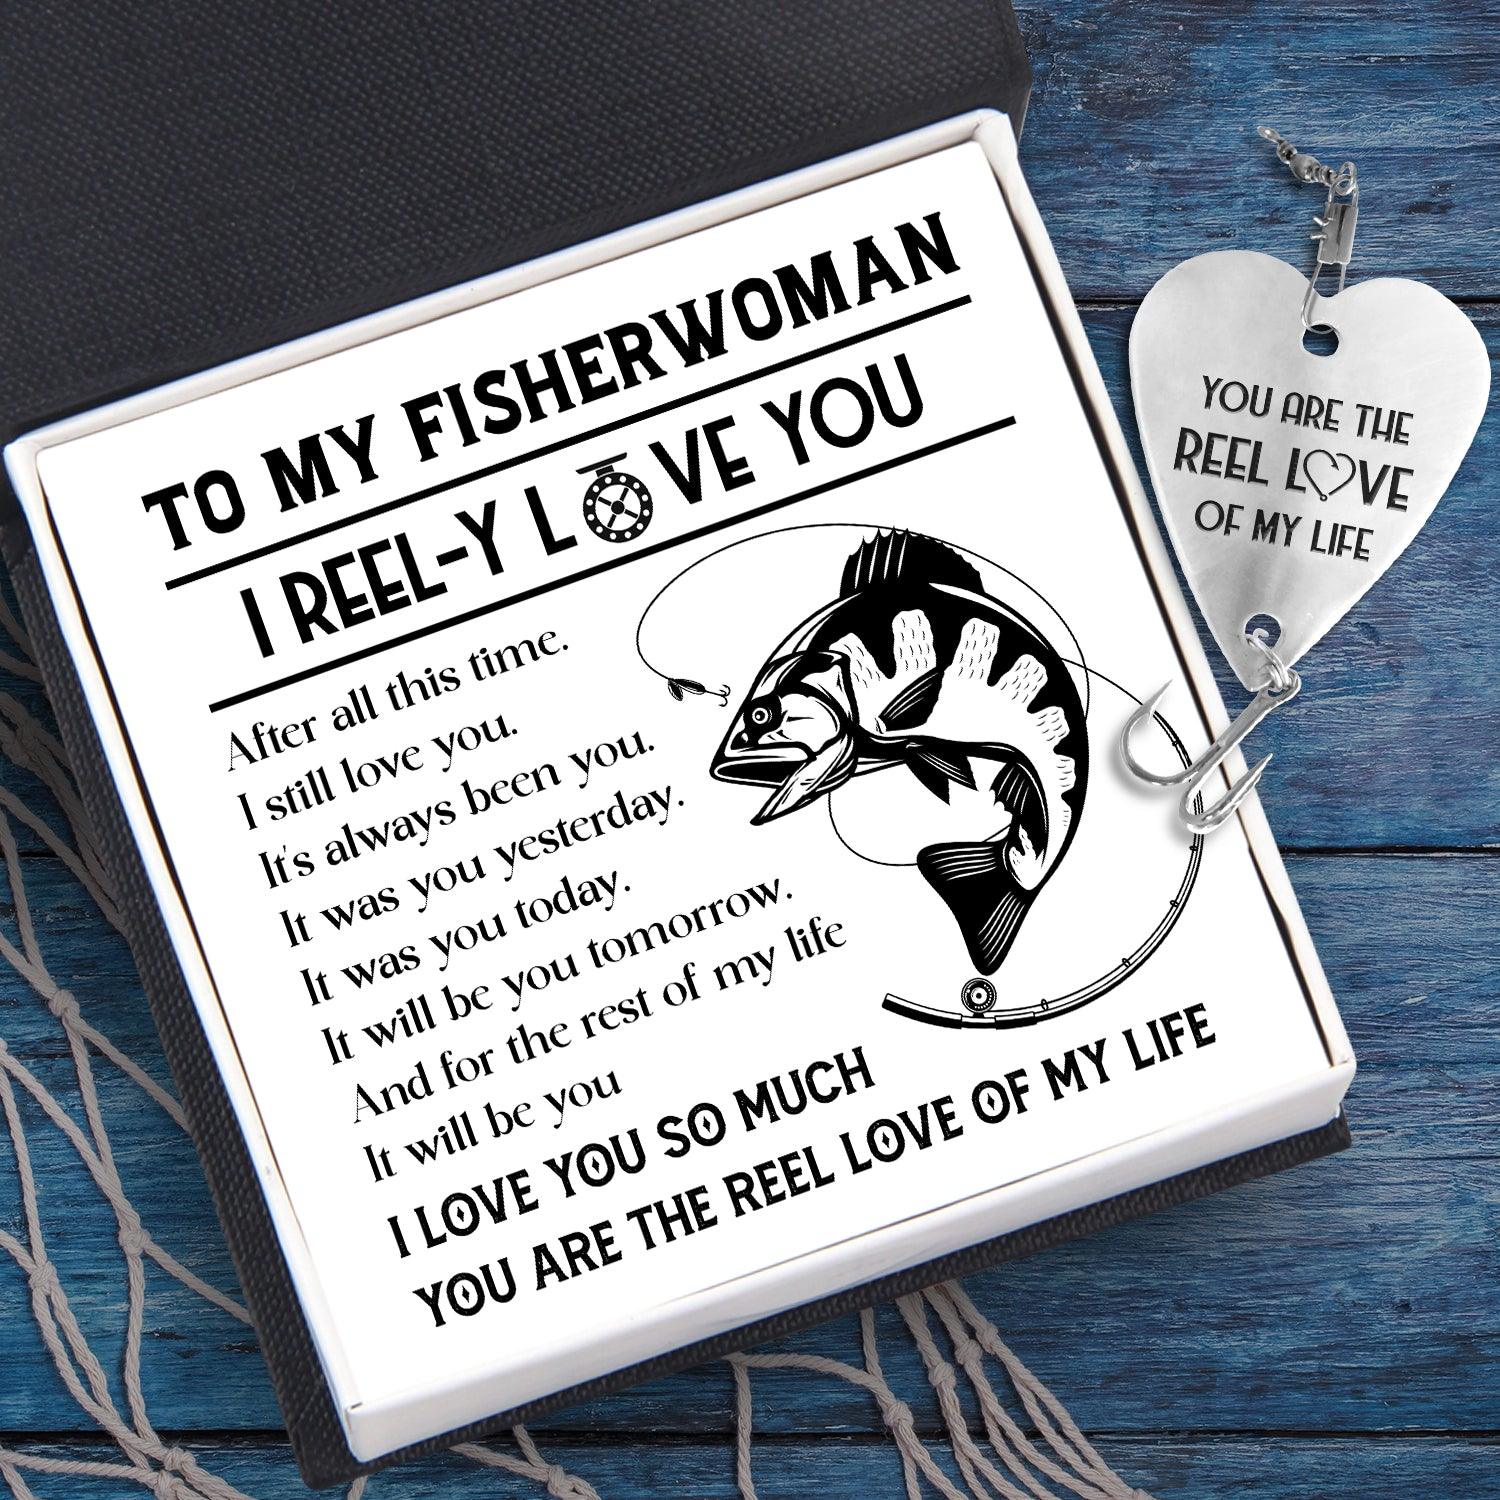 Heart Fishing Lure - Fishing - To My Fisherwoman - I Love You So Much - Augfc13004 - Gifts Holder